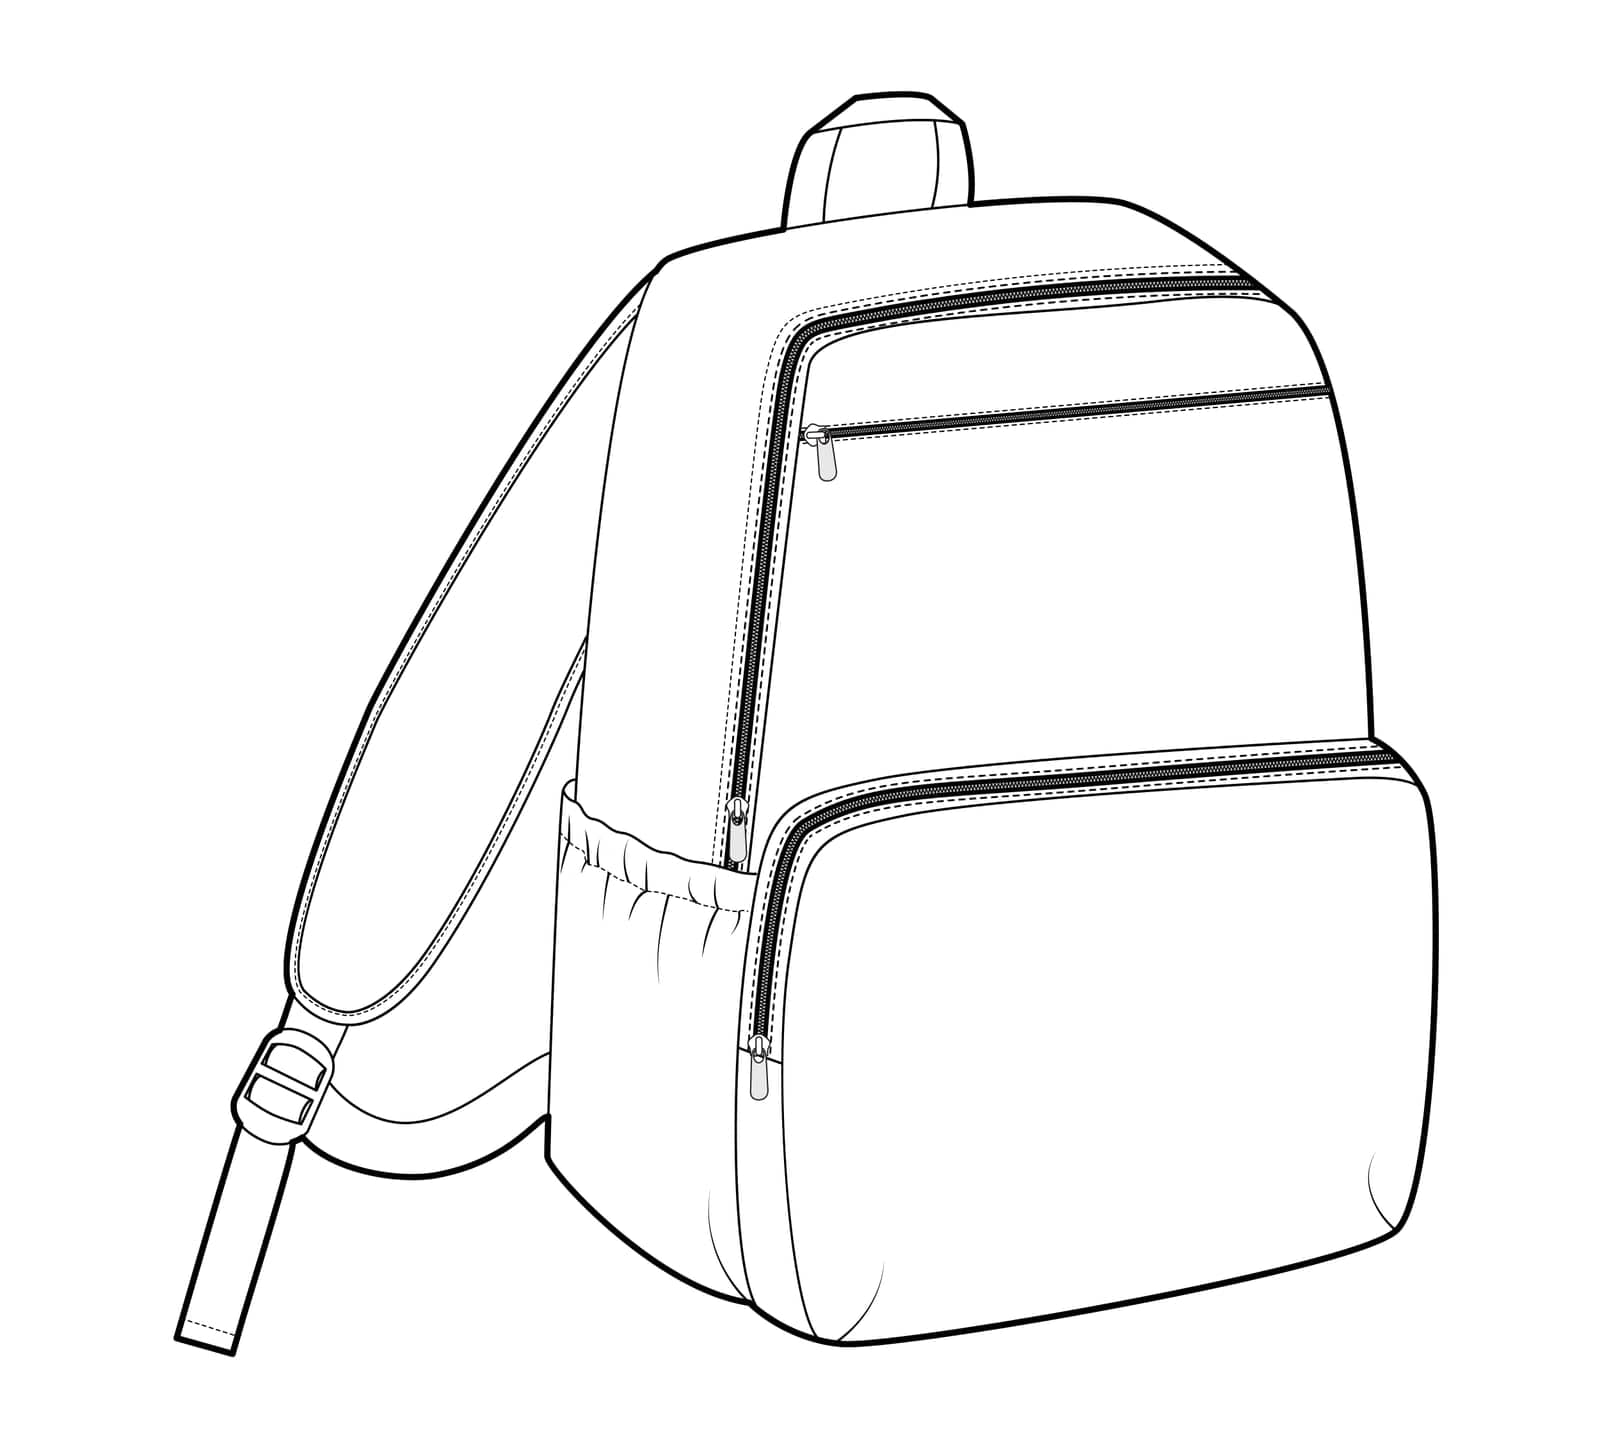 School Bag backpack silhouette bag. Fashion accessory technical illustration. Vector schoolbag 3-4 view for Men, women, unisex style, flat handbag CAD mockup sketch outline isolated